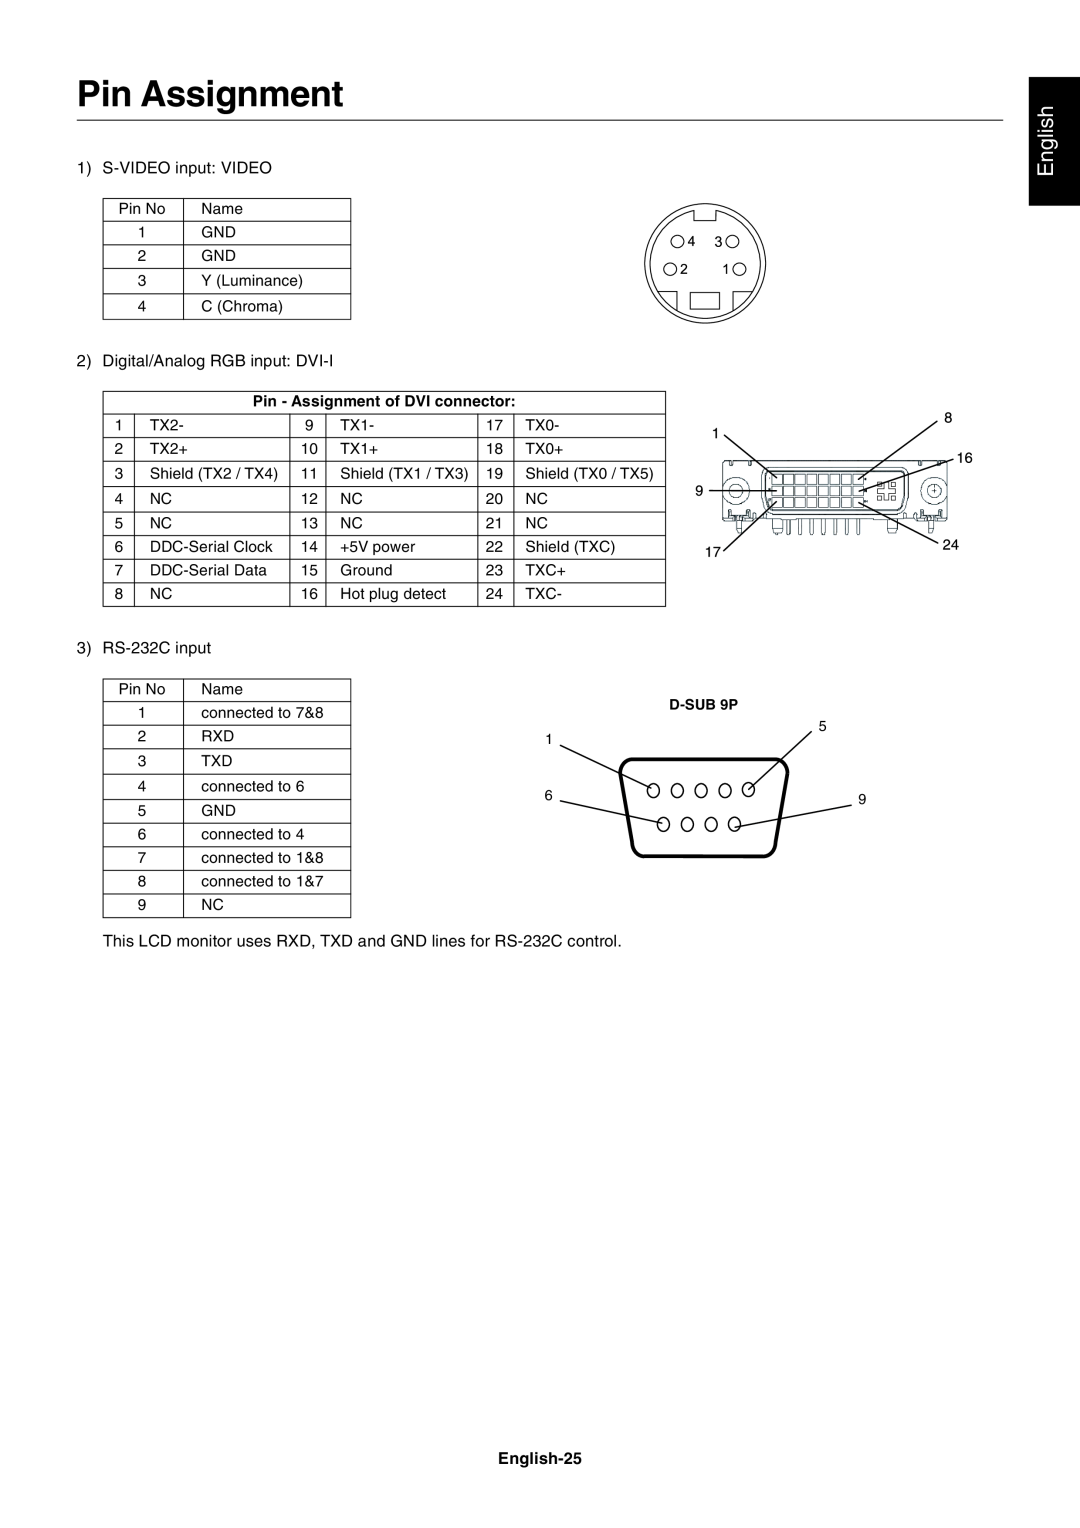 NEC LCD8205-P user manual Pin Assignment, English-25, Pin - Assignment of DVI connector, D-SUB9P 